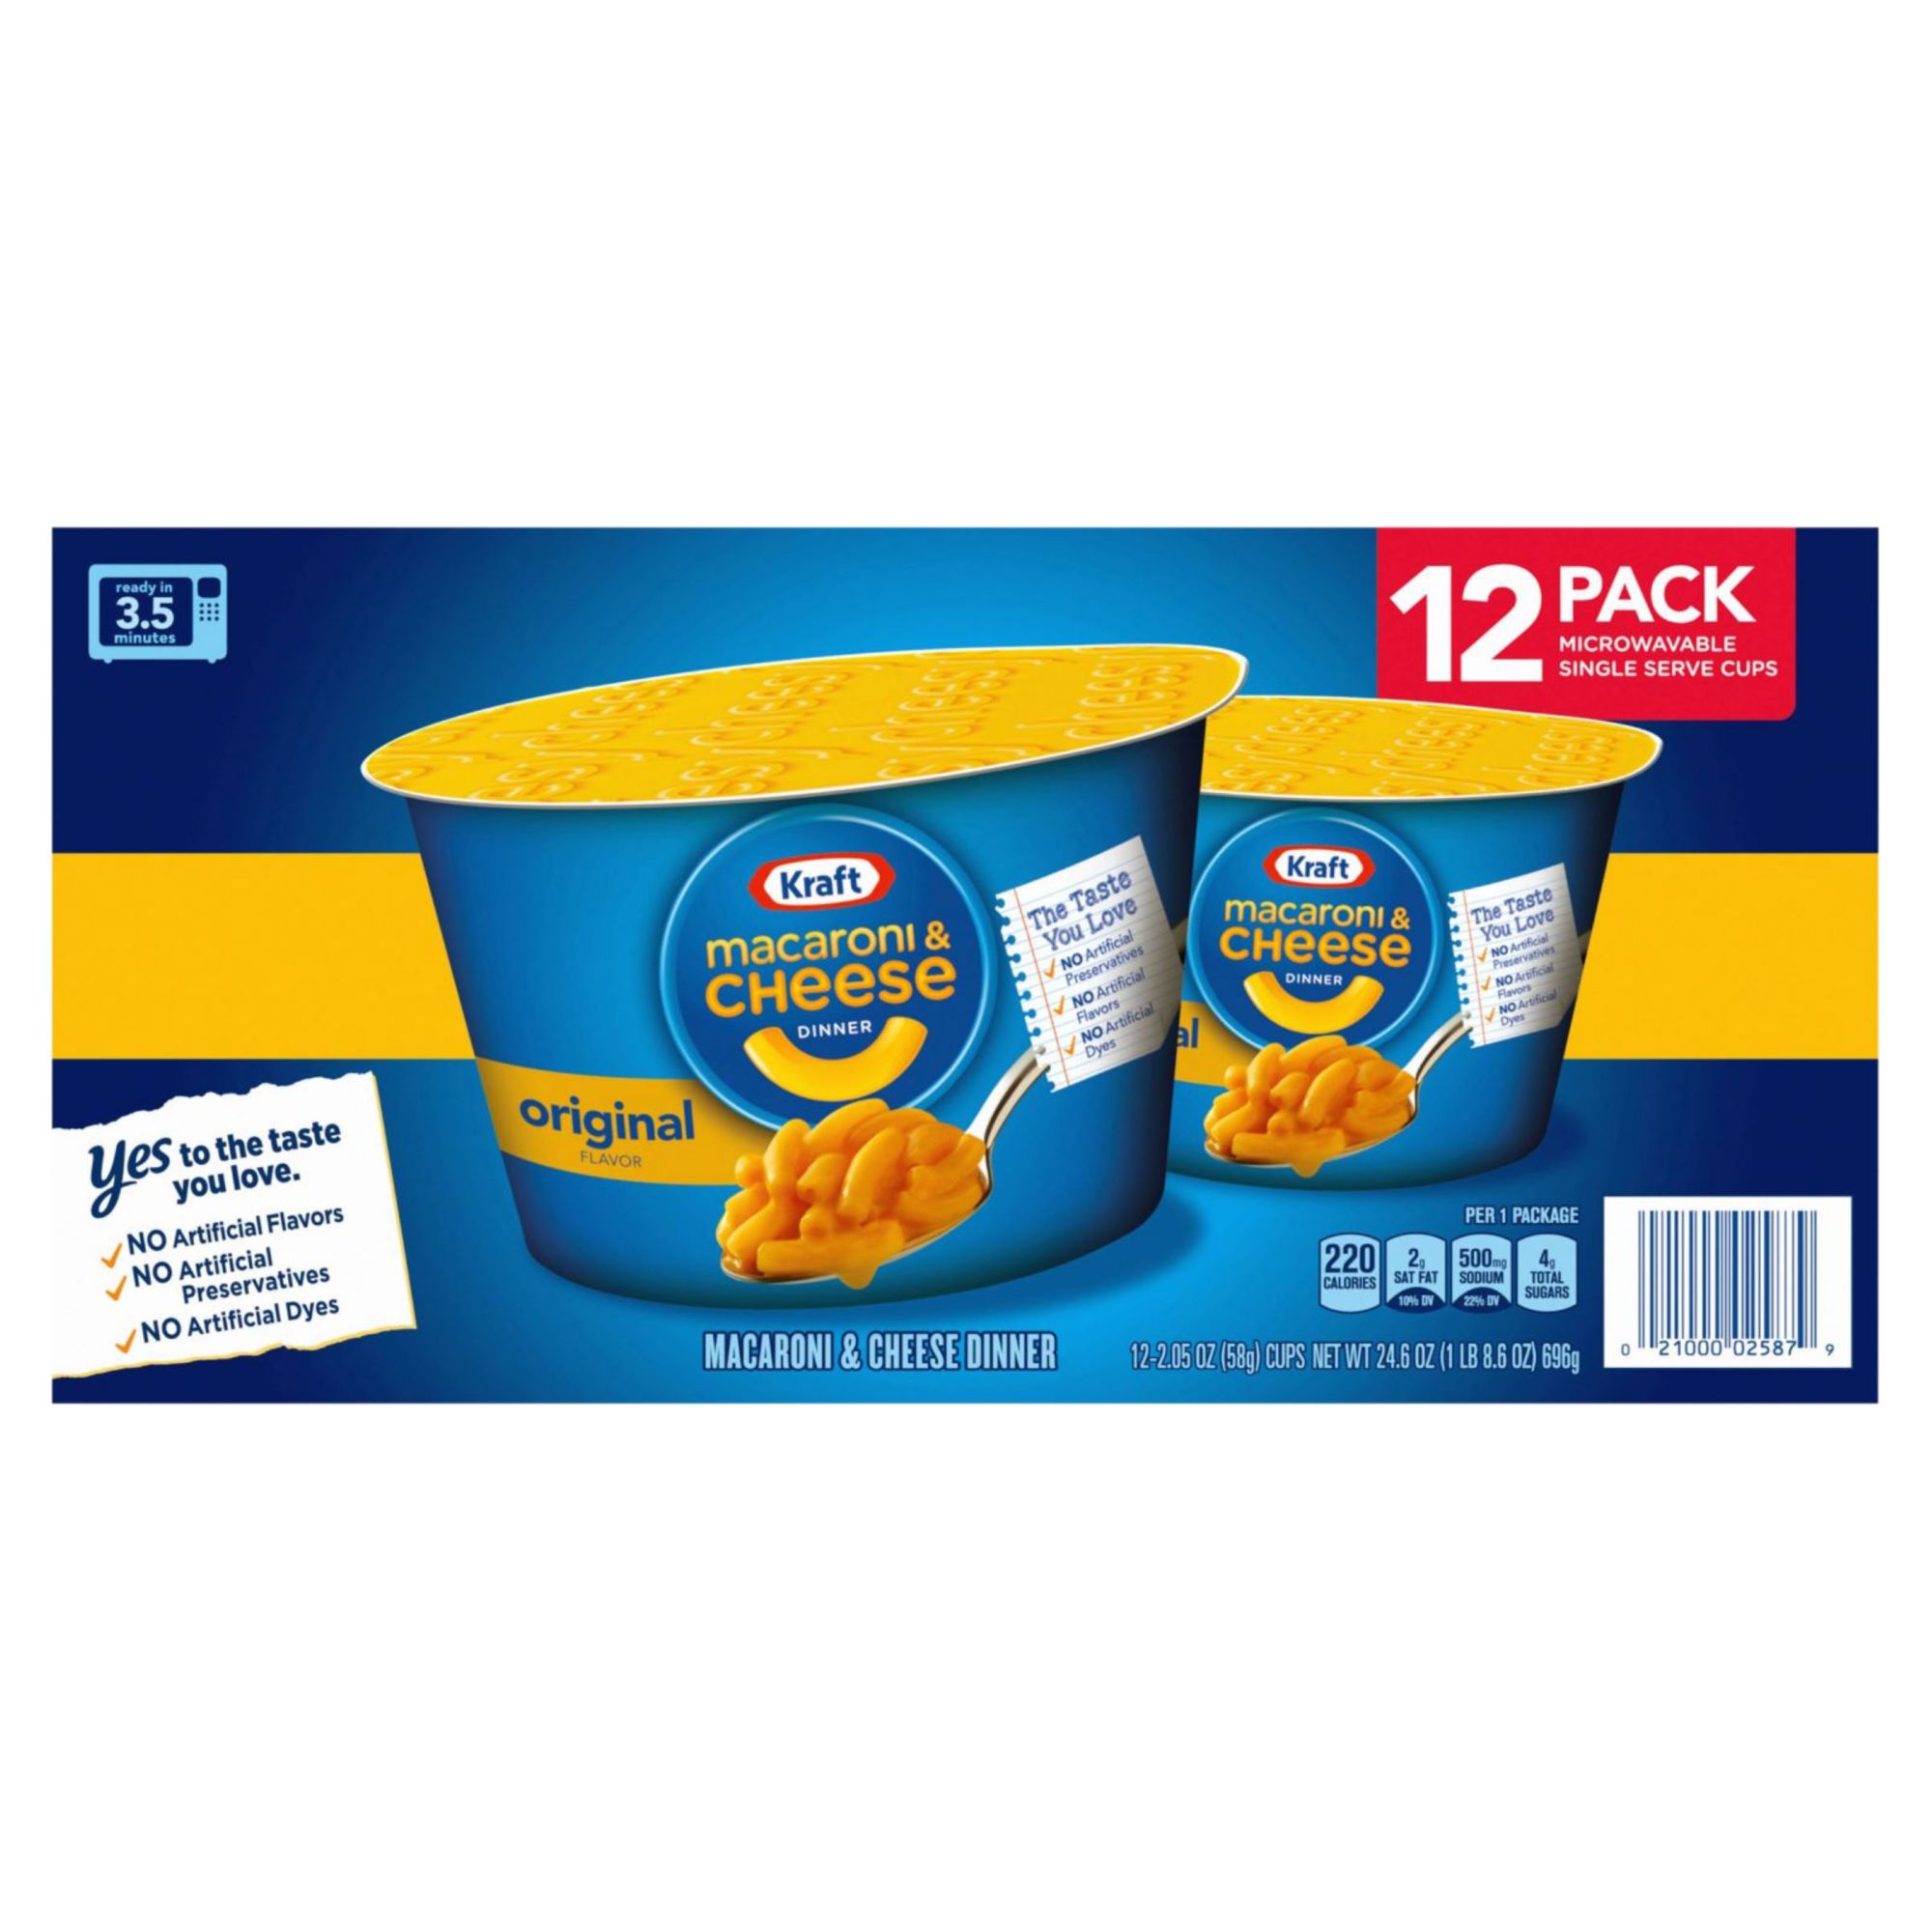 What if TSMBM Got a Kraft Mac and Cheese Box? by jacobstout on